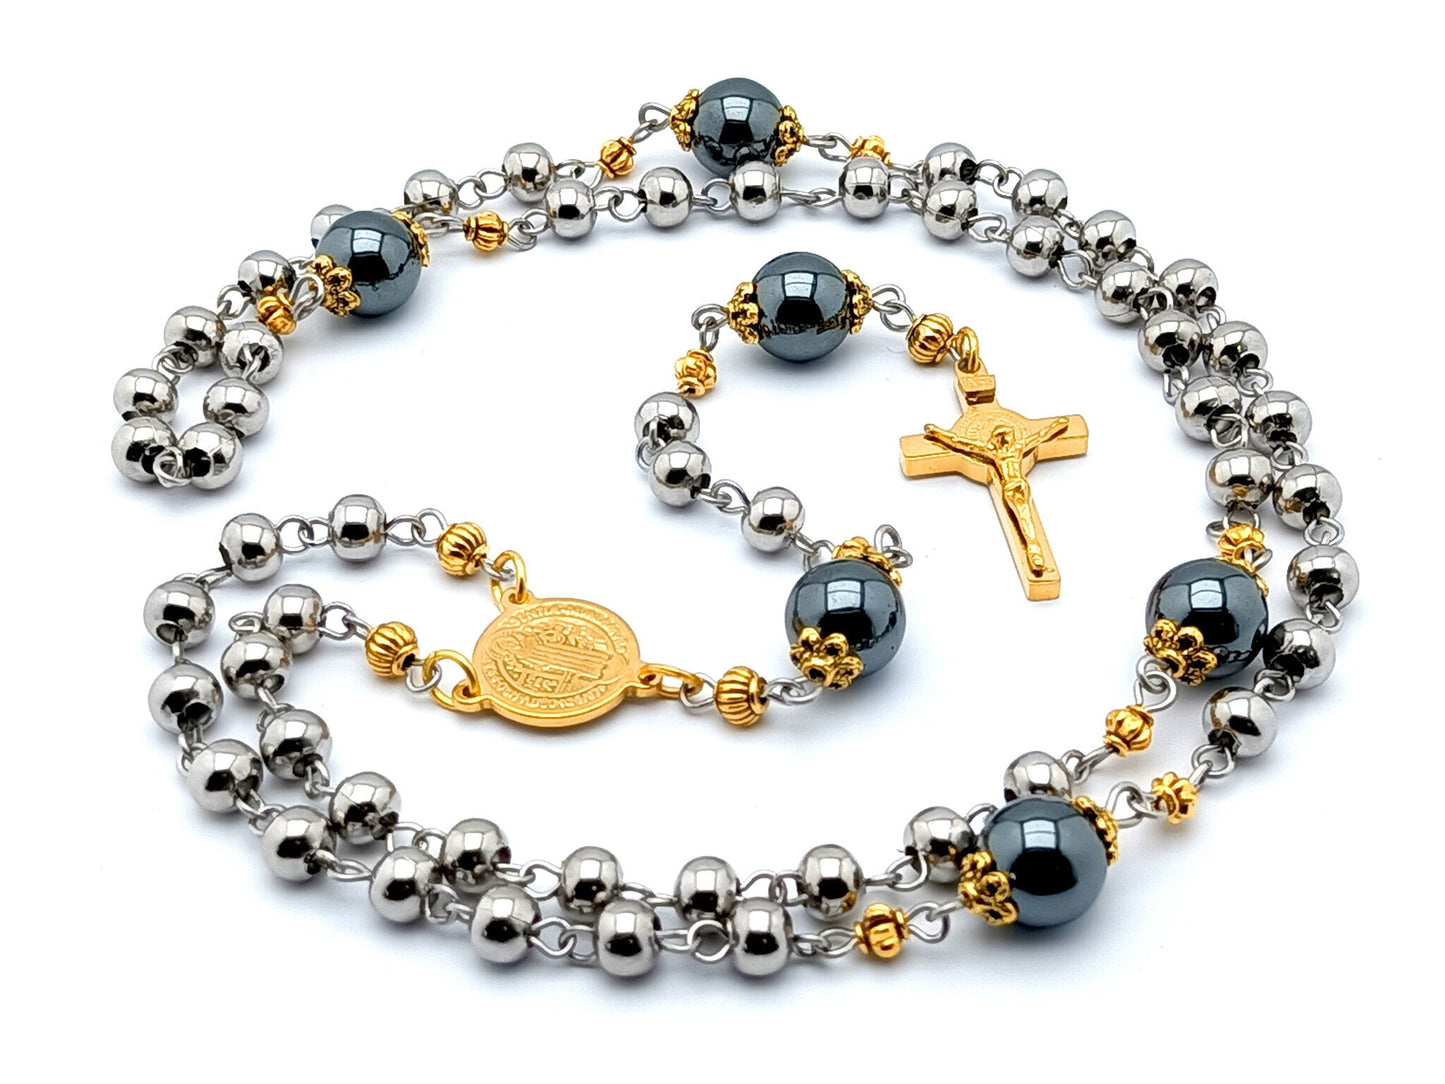 Saint Benedict unique rosary beads with stainless steel and hematite beads, stainless steel gold plated crucifix and gold plated stainless steel centre medal.